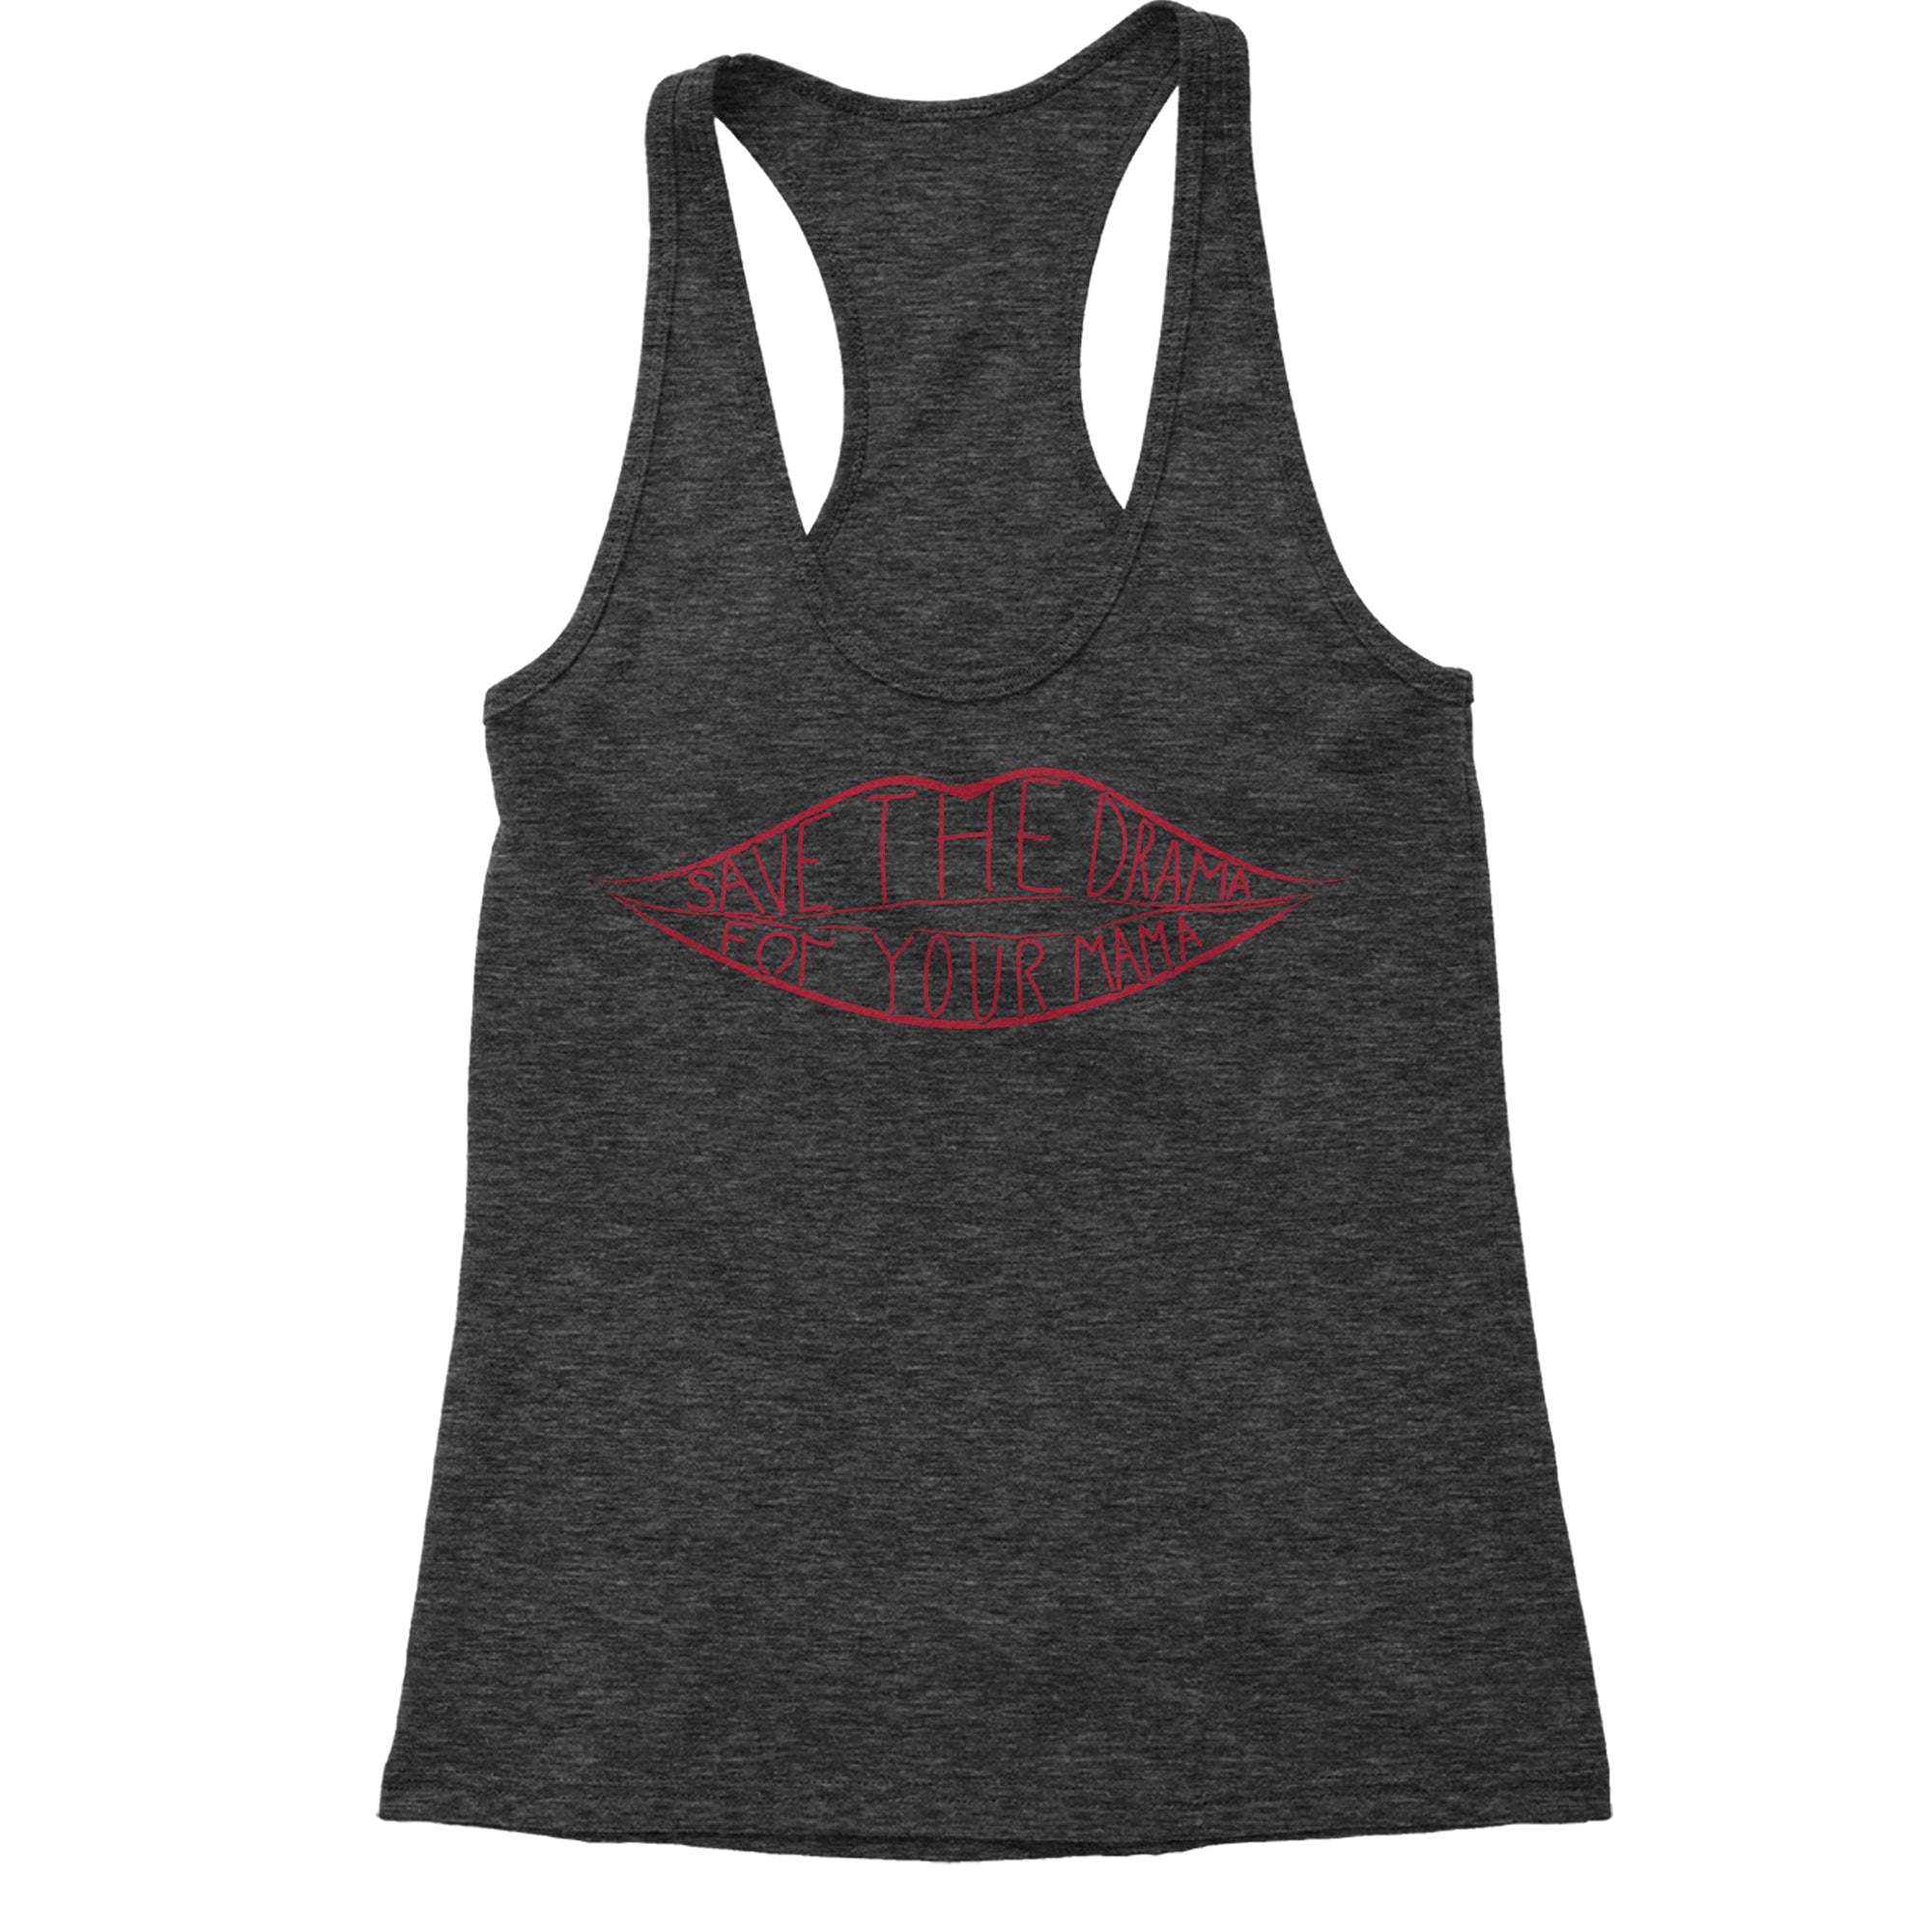 Save The Drama For Your Mama Women's Racerback Tank